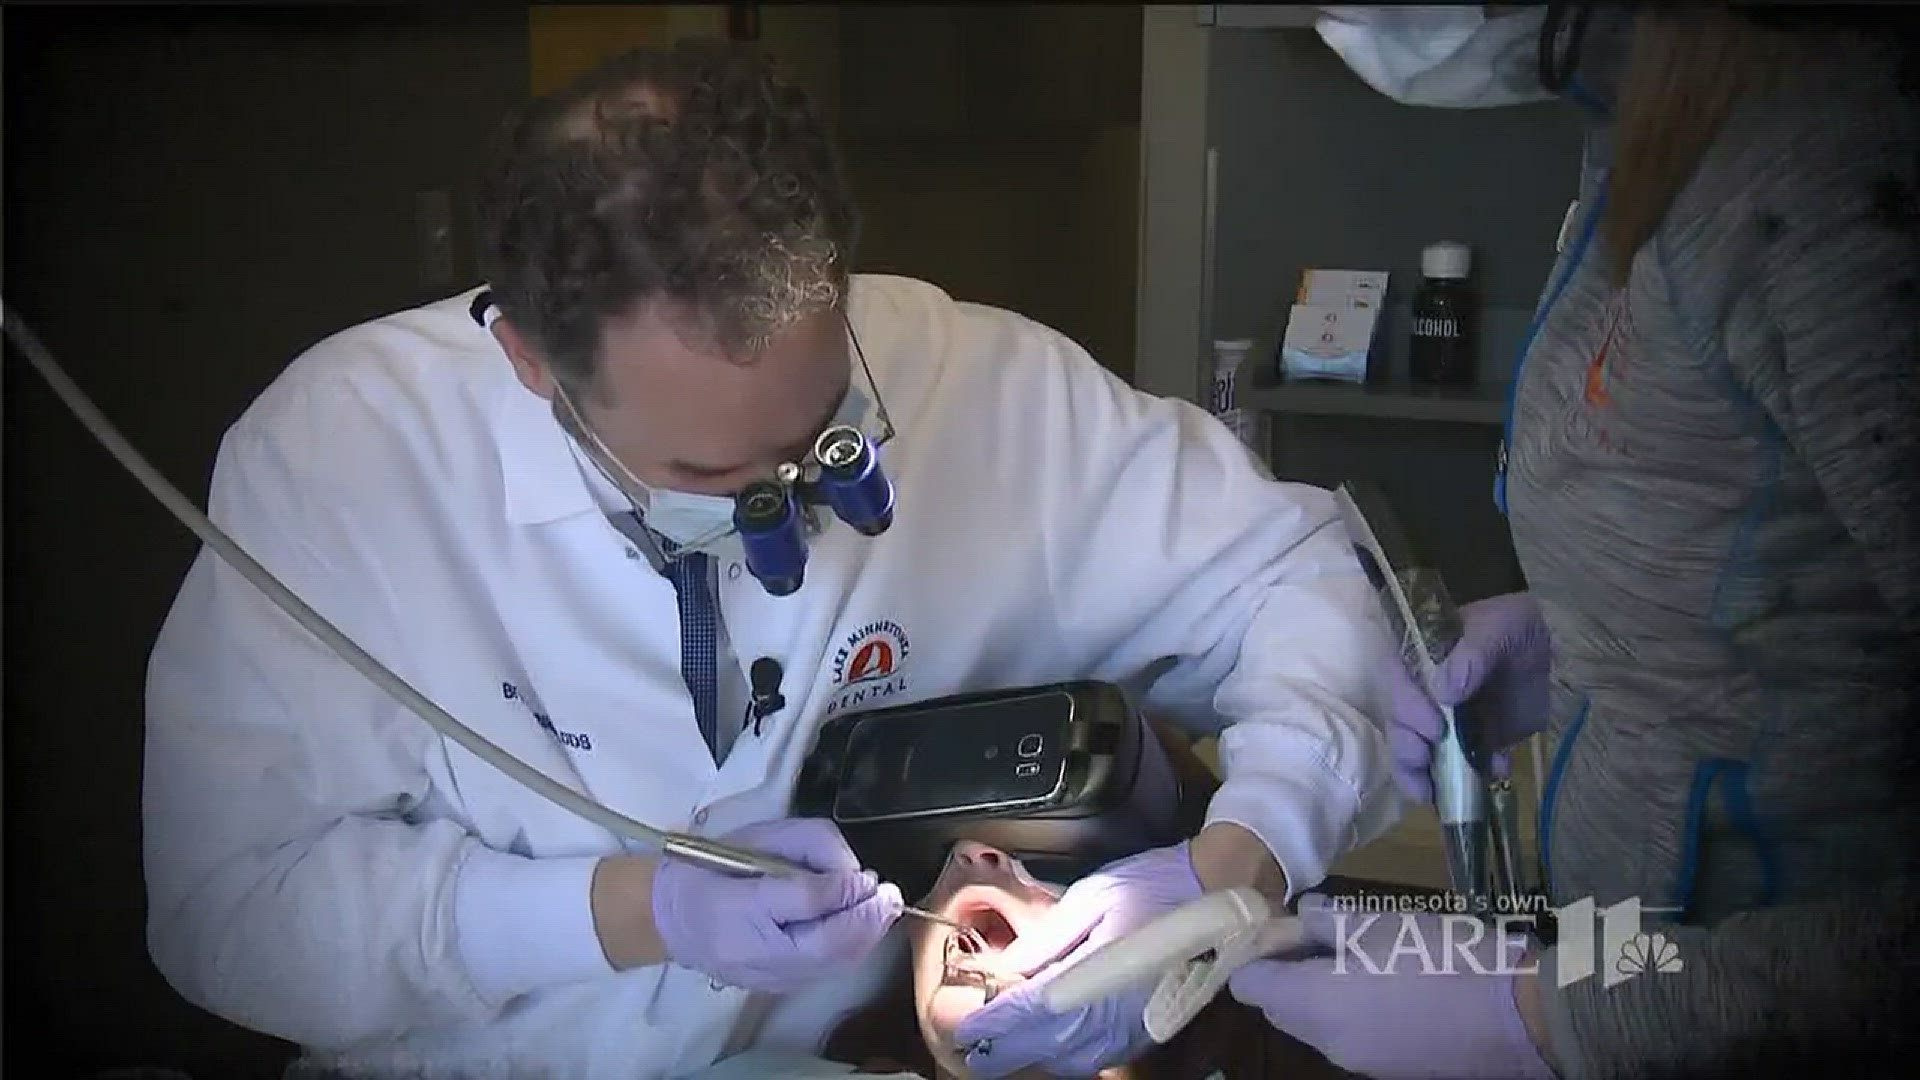 Easing dental worries with virtual reality